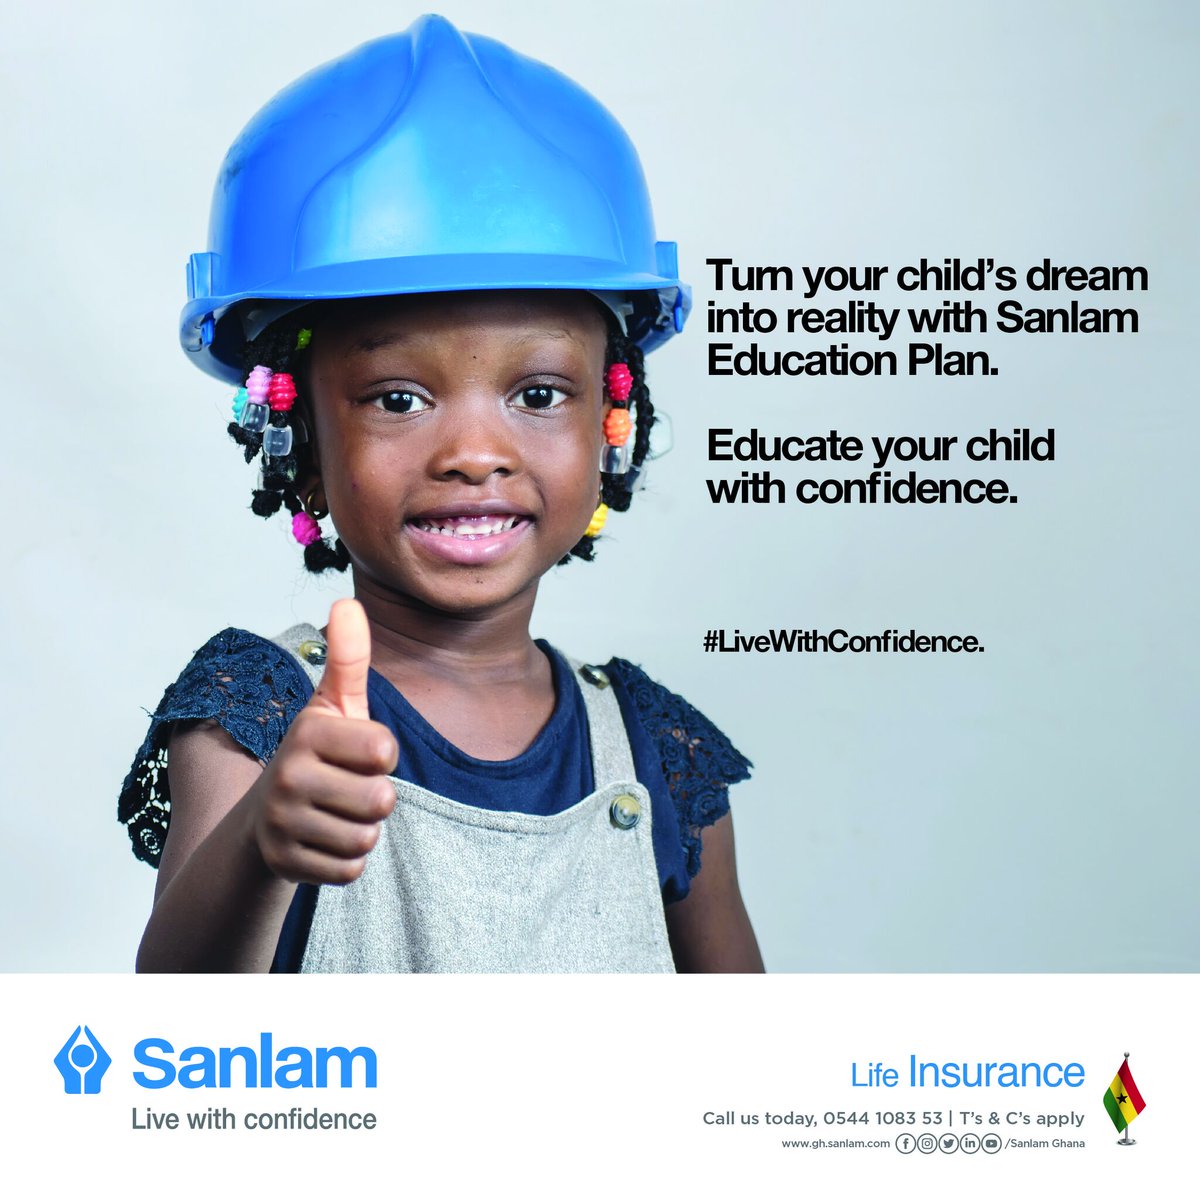 Dreams can come true if we dare to pursue them.

Sign up for the Sanlam Education Plan or
Visit bit.ly/3U3G7cf today!

#SanlamGhana
#LifeInsurance
#SanlamEducationPlan 
#LiveWithConfidence